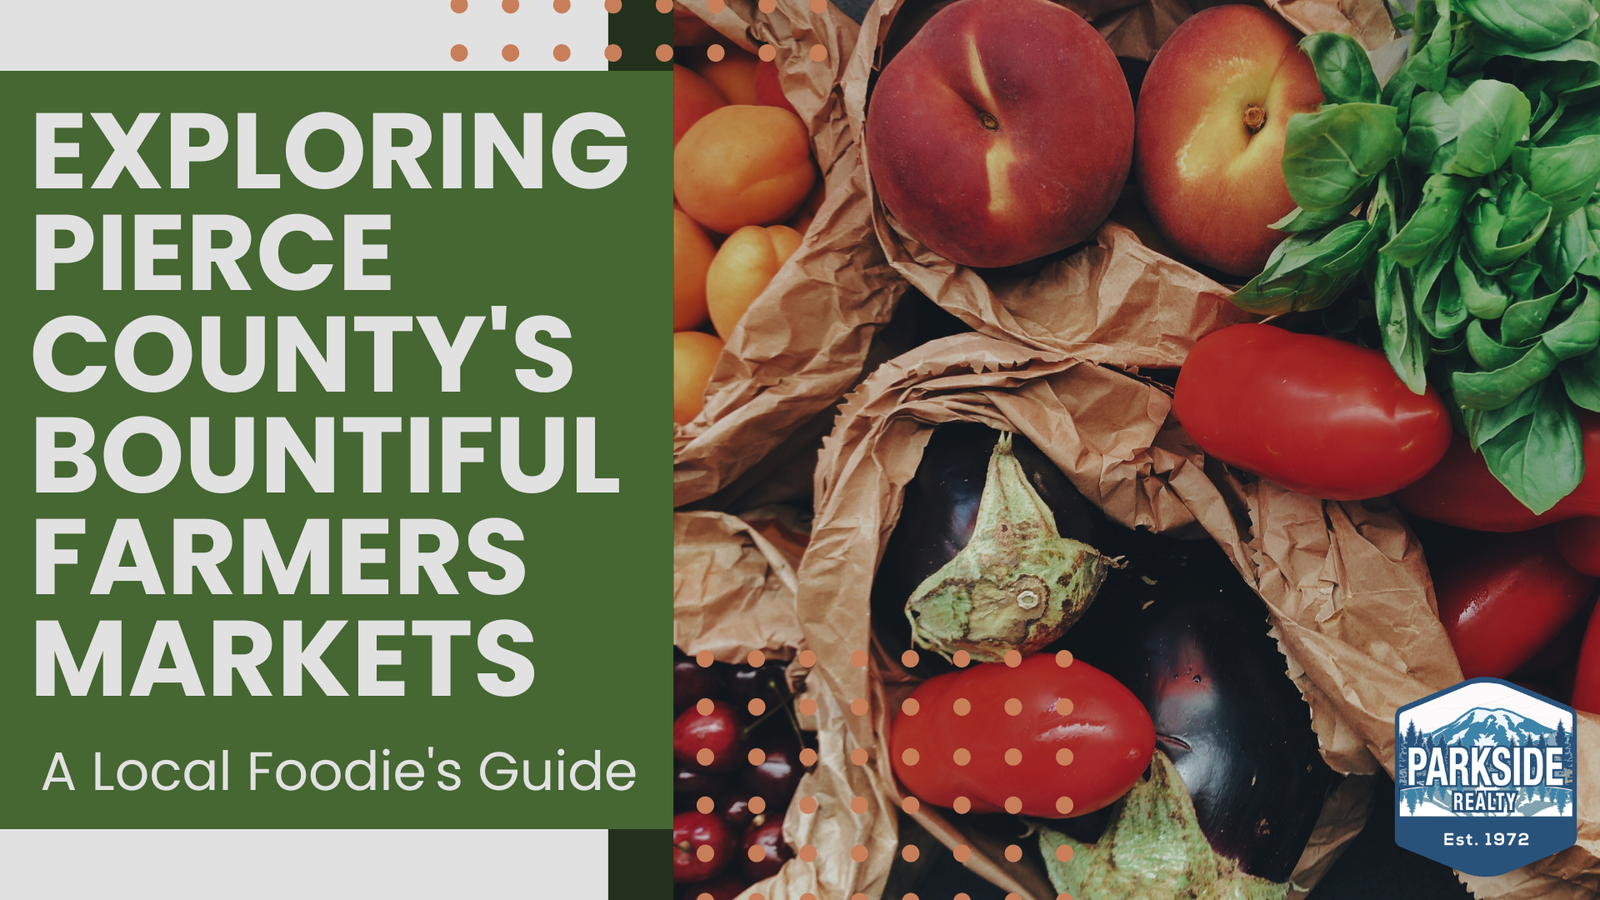 Exploring Pierce County’s Bountiful Farmers Markets: A Local Foodie’s Guide